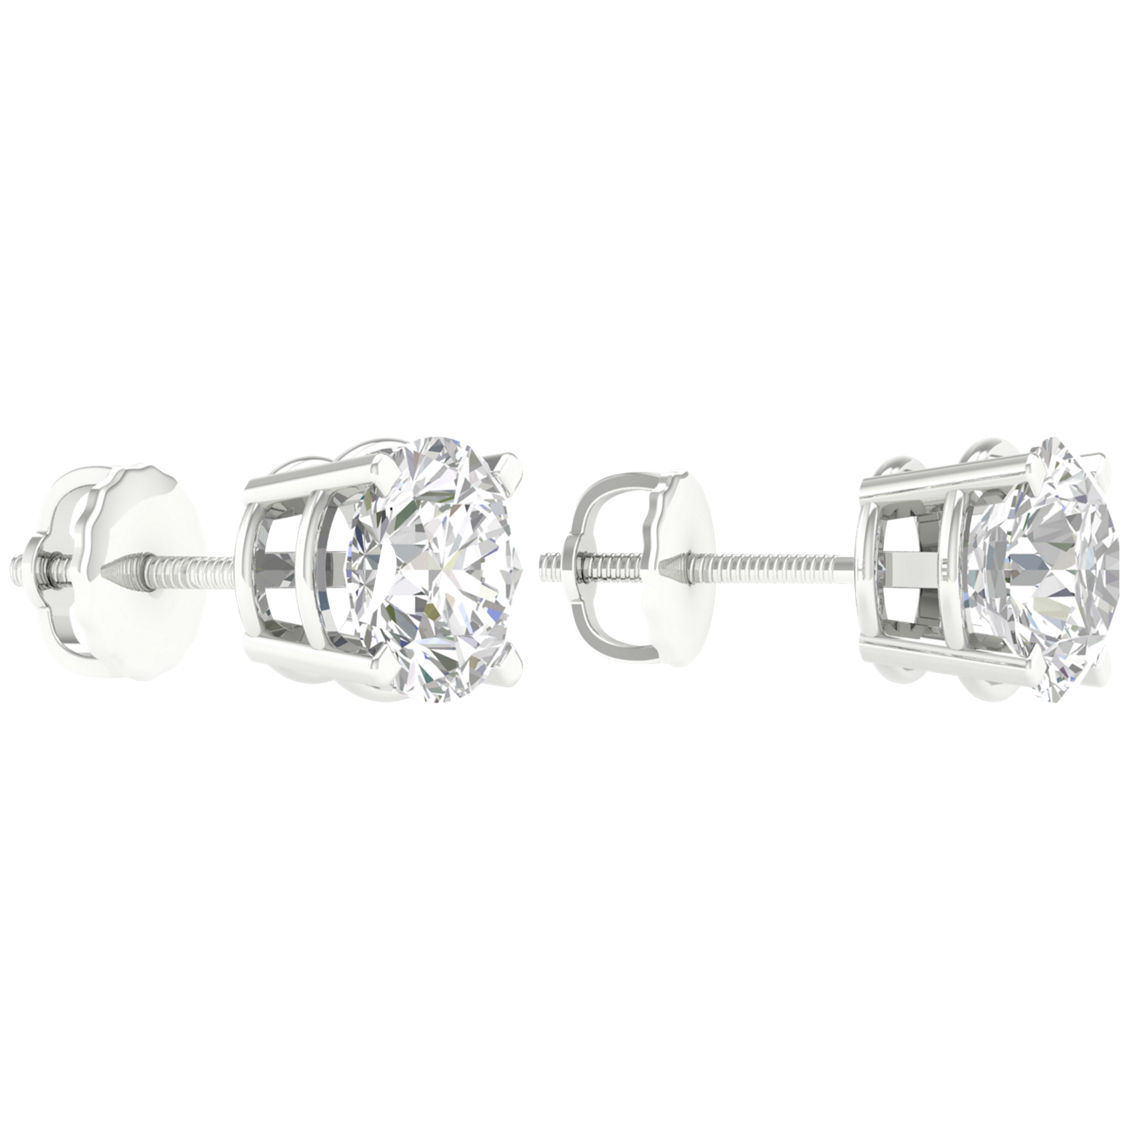 Pure Brilliance 14K White Gold 3 CTW Stud Earring with IGI Certification - Image 2 of 2